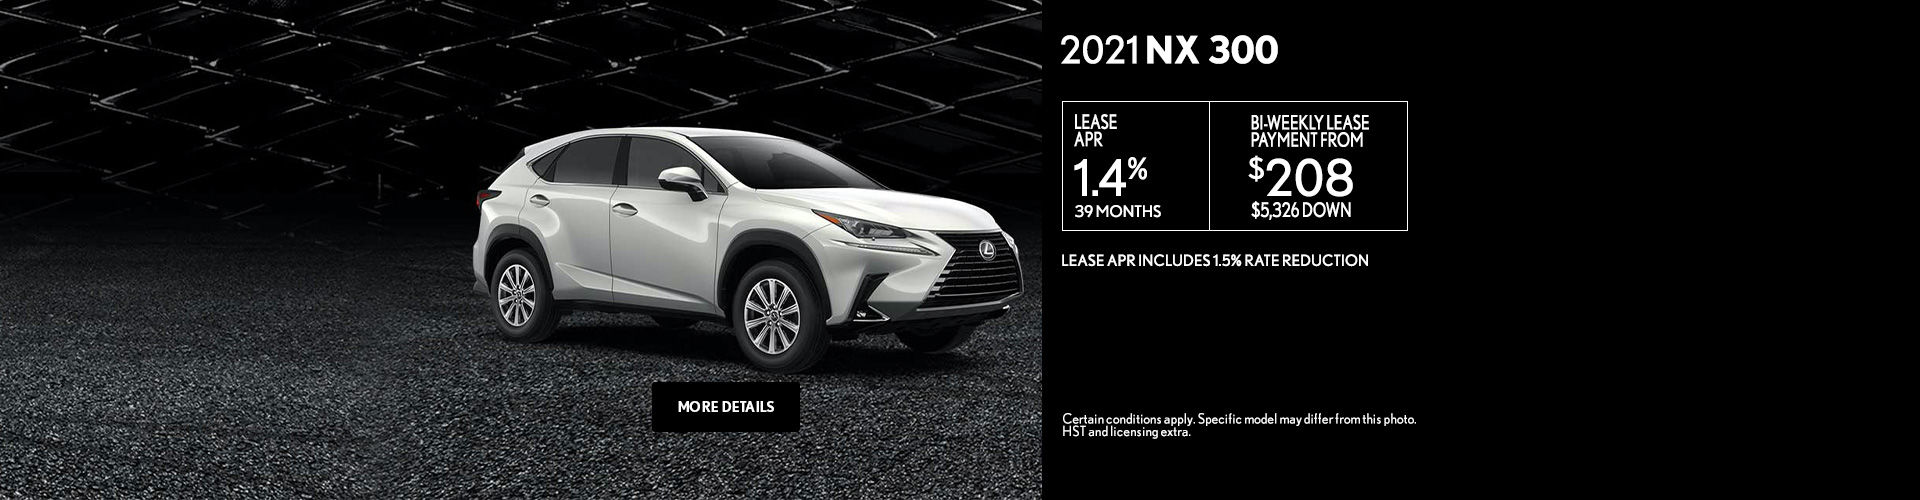 Erin Park Lexus | New and Pre-Owned Vehicles in Mississauga